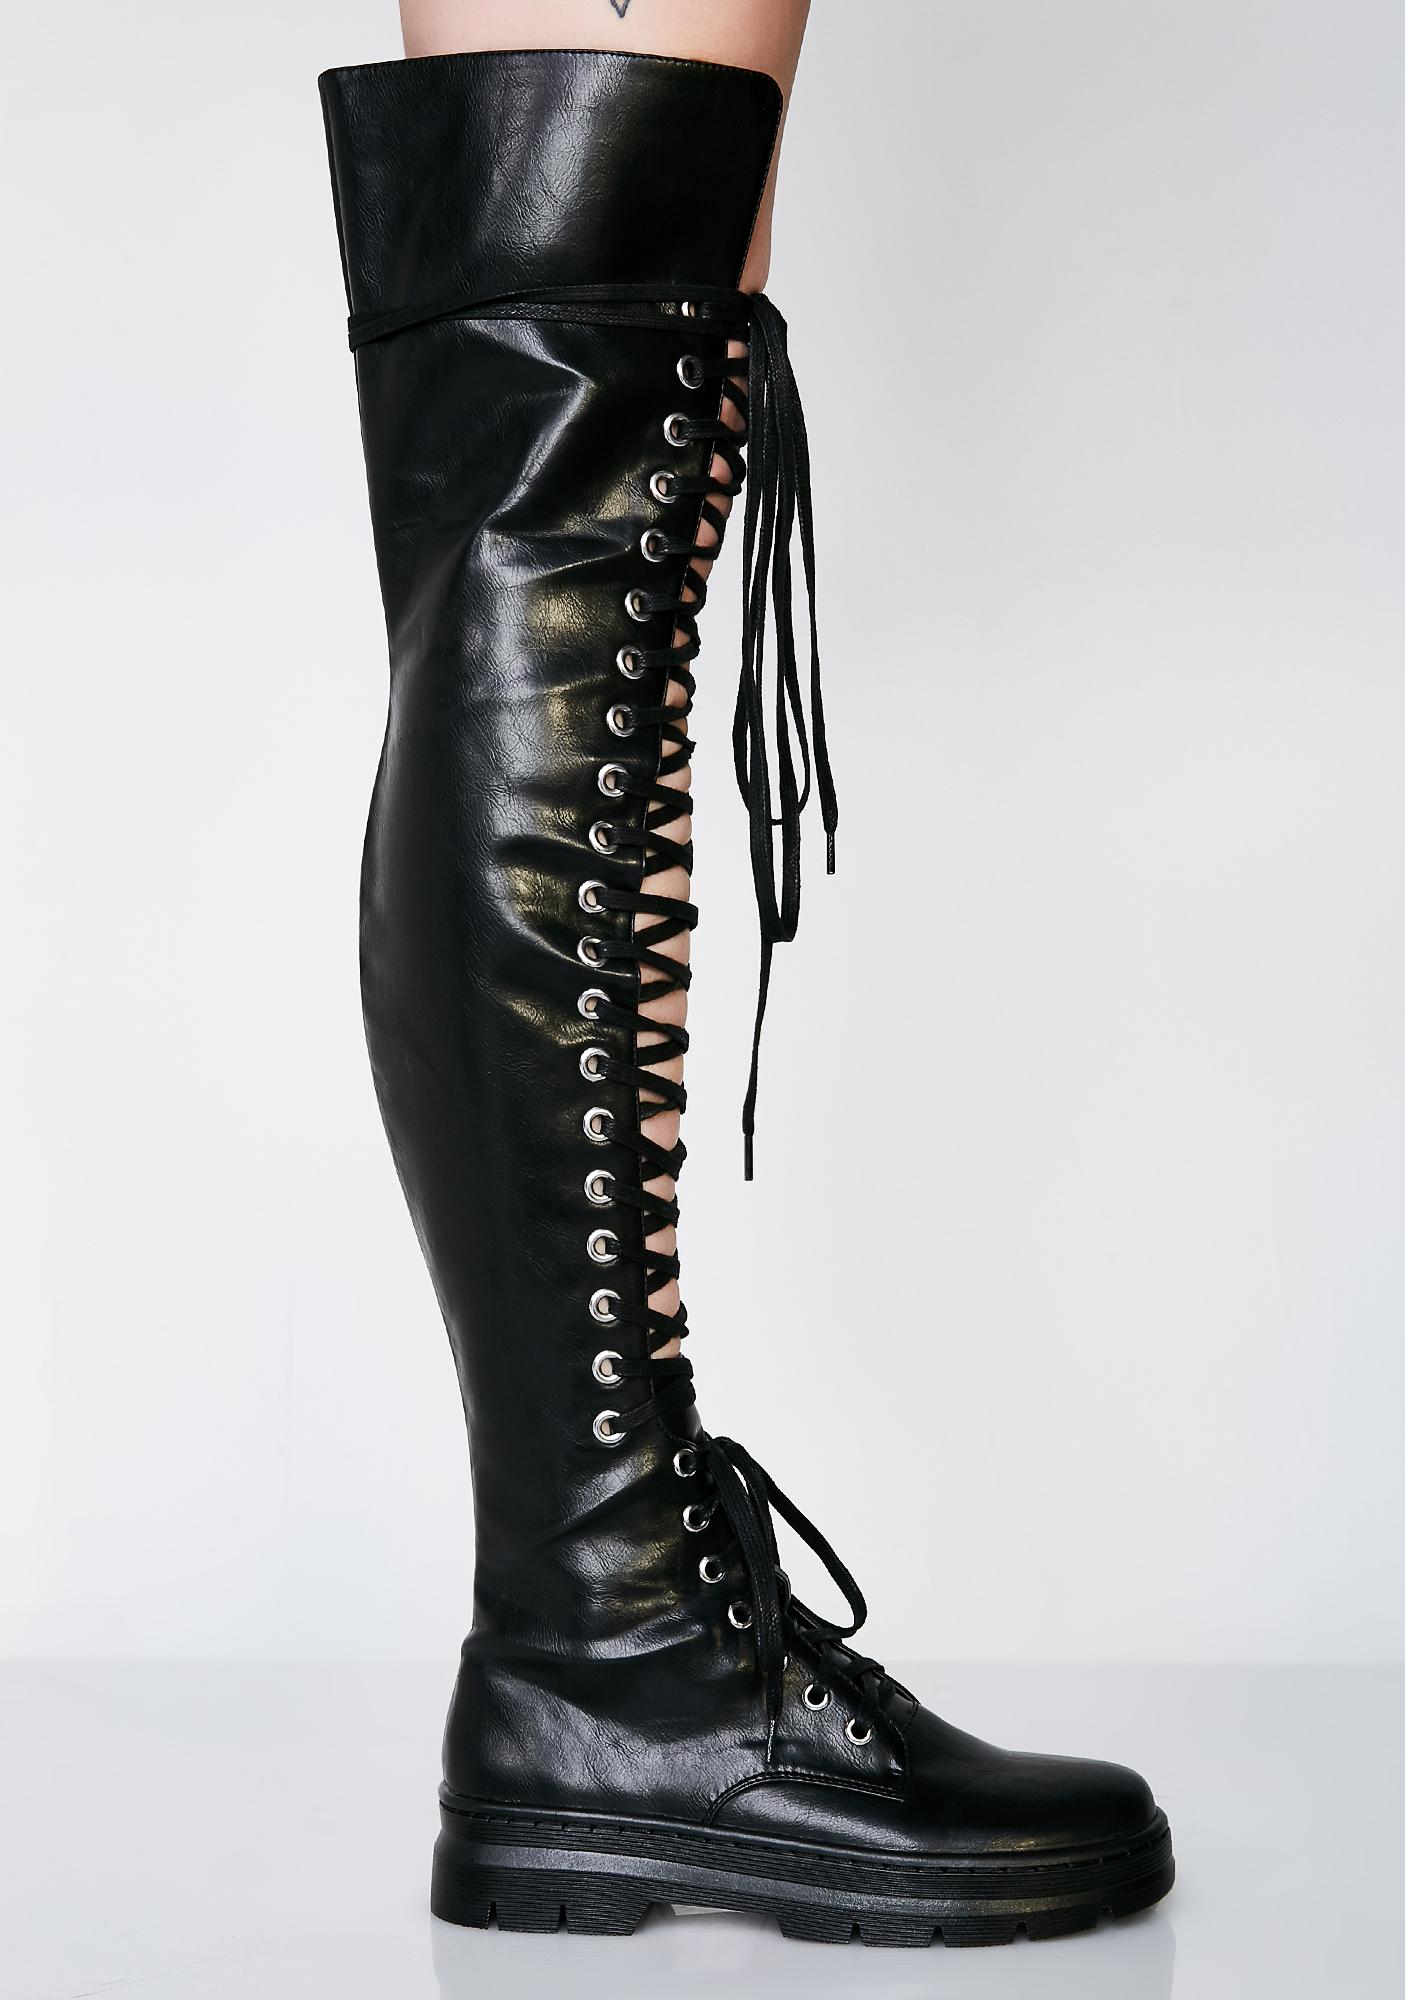 poster girl combat boots